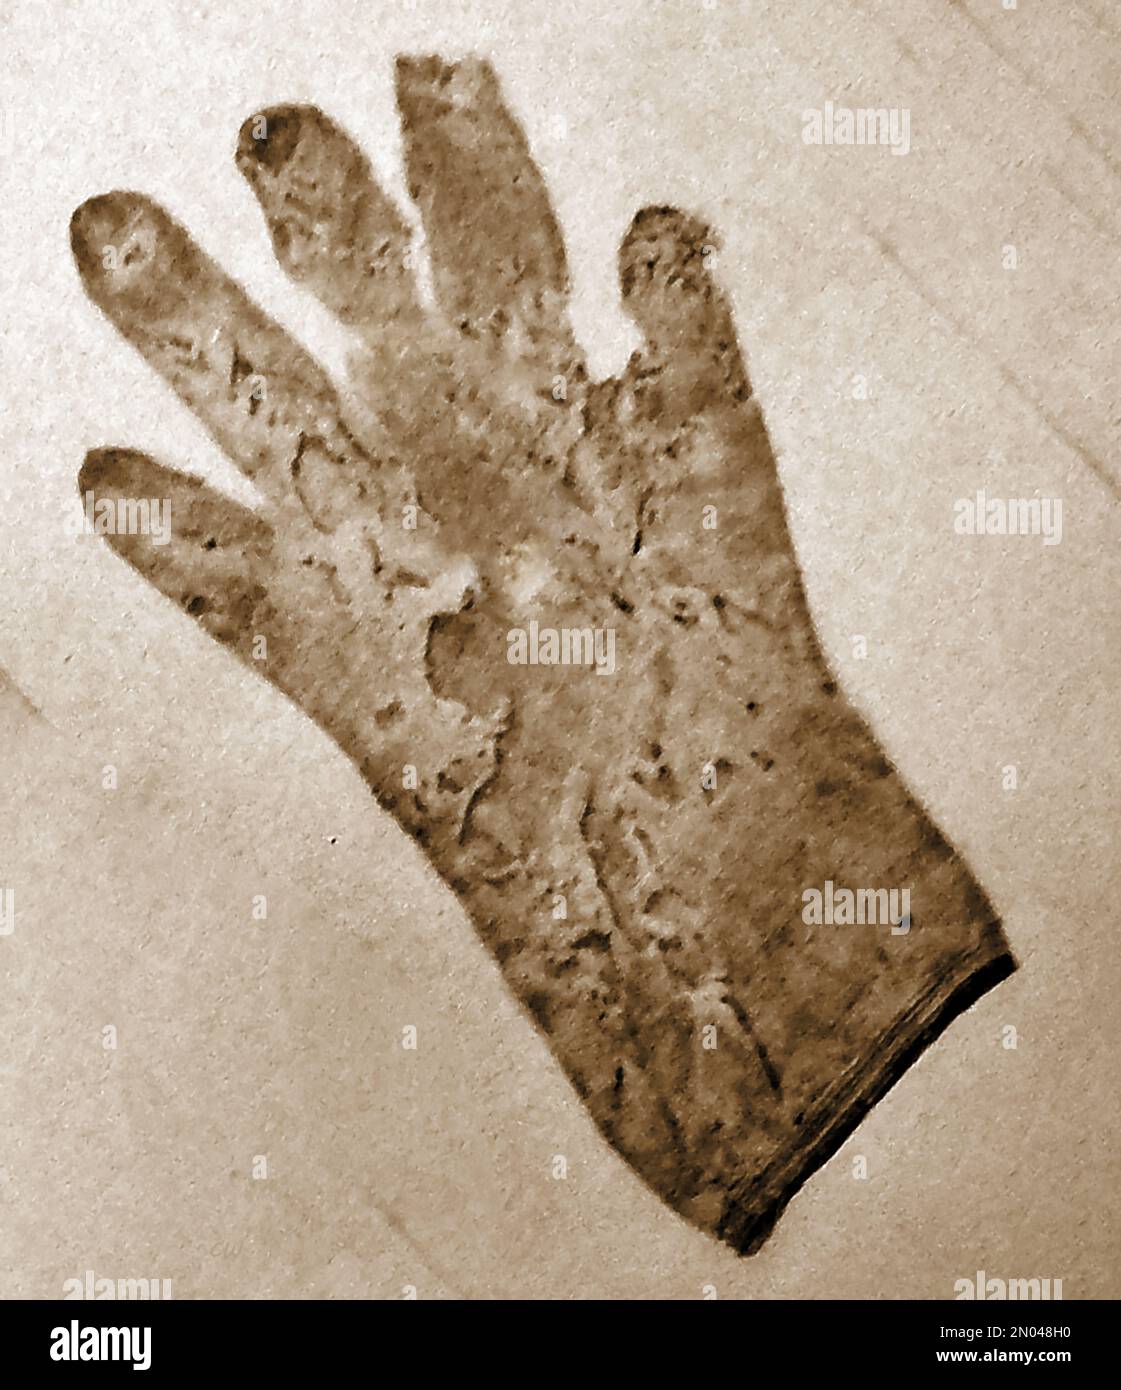 British pubs inns & taverns - A circa 1940 old photograph of An 18th century sailor's glove found in the bombed out roof space of the George at Portsmouth in WWII. Stock Photo